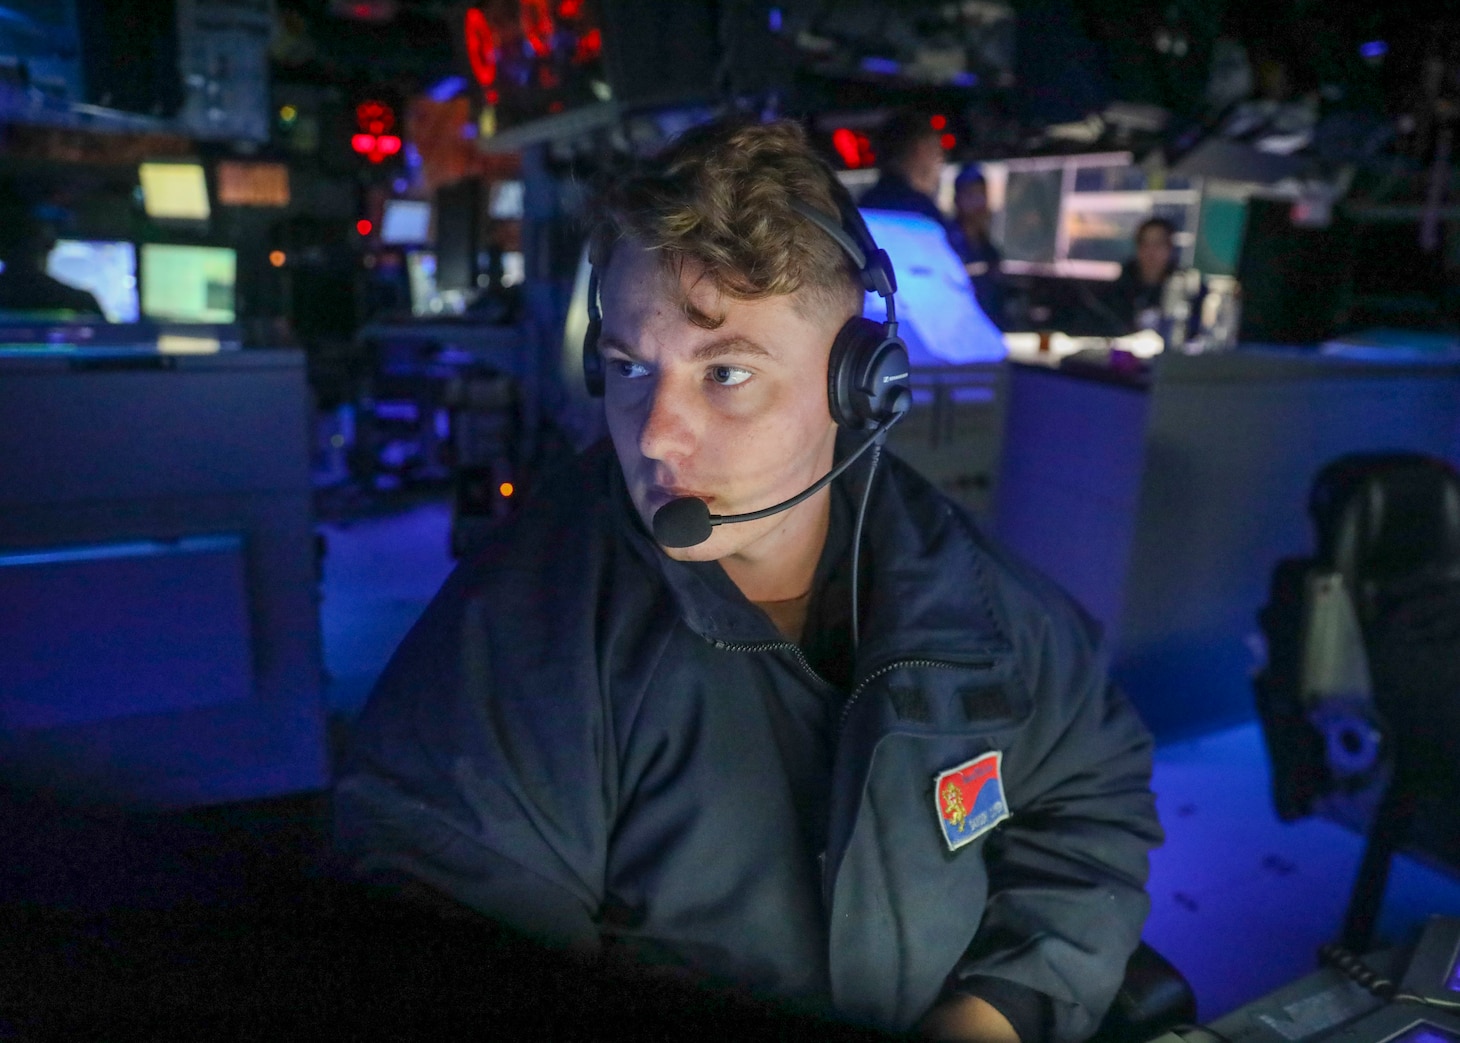 SOUTH CHINA SEA (July 13, 2022) Gunner’s Mate 2nd Class Dawson Cooper, from Clawson, Michigan, monitors surface contacts from the combat information center as the guided-missile destroyer USS Benfold (DDG 65) conducts routine underway operations. Benfold is forward-deployed to the U.S. 7th Fleet area of operations in support of a free and open Indo-Pacific. (U.S. Navy photo by Mass Communication Specialist 2nd Class Arthur Rosen)